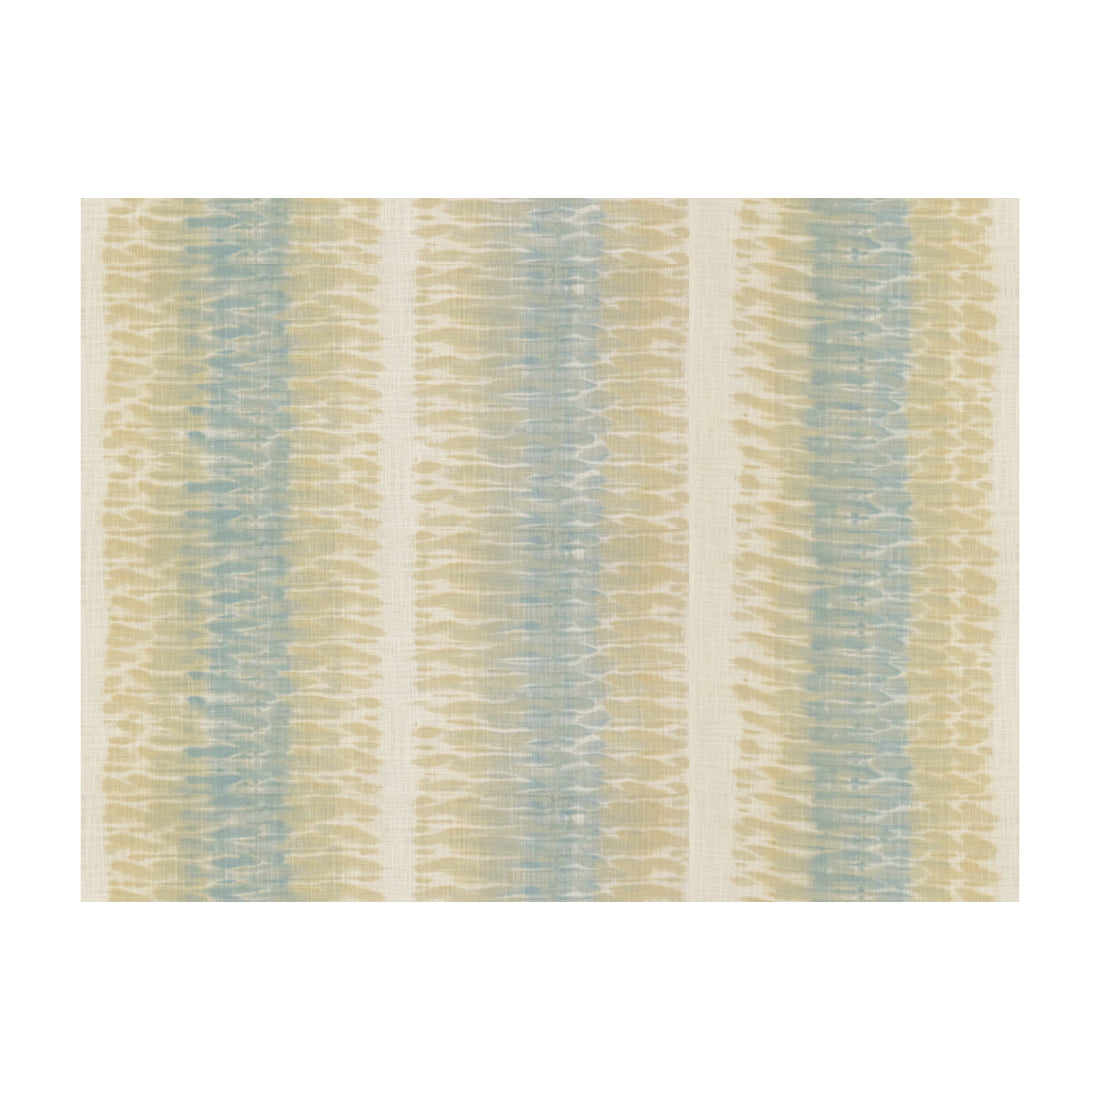 Ashbury fabric in oasis color - pattern 33550.1516.0 - by Kravet Design in the Jeffrey Alan Marks Waterside collection